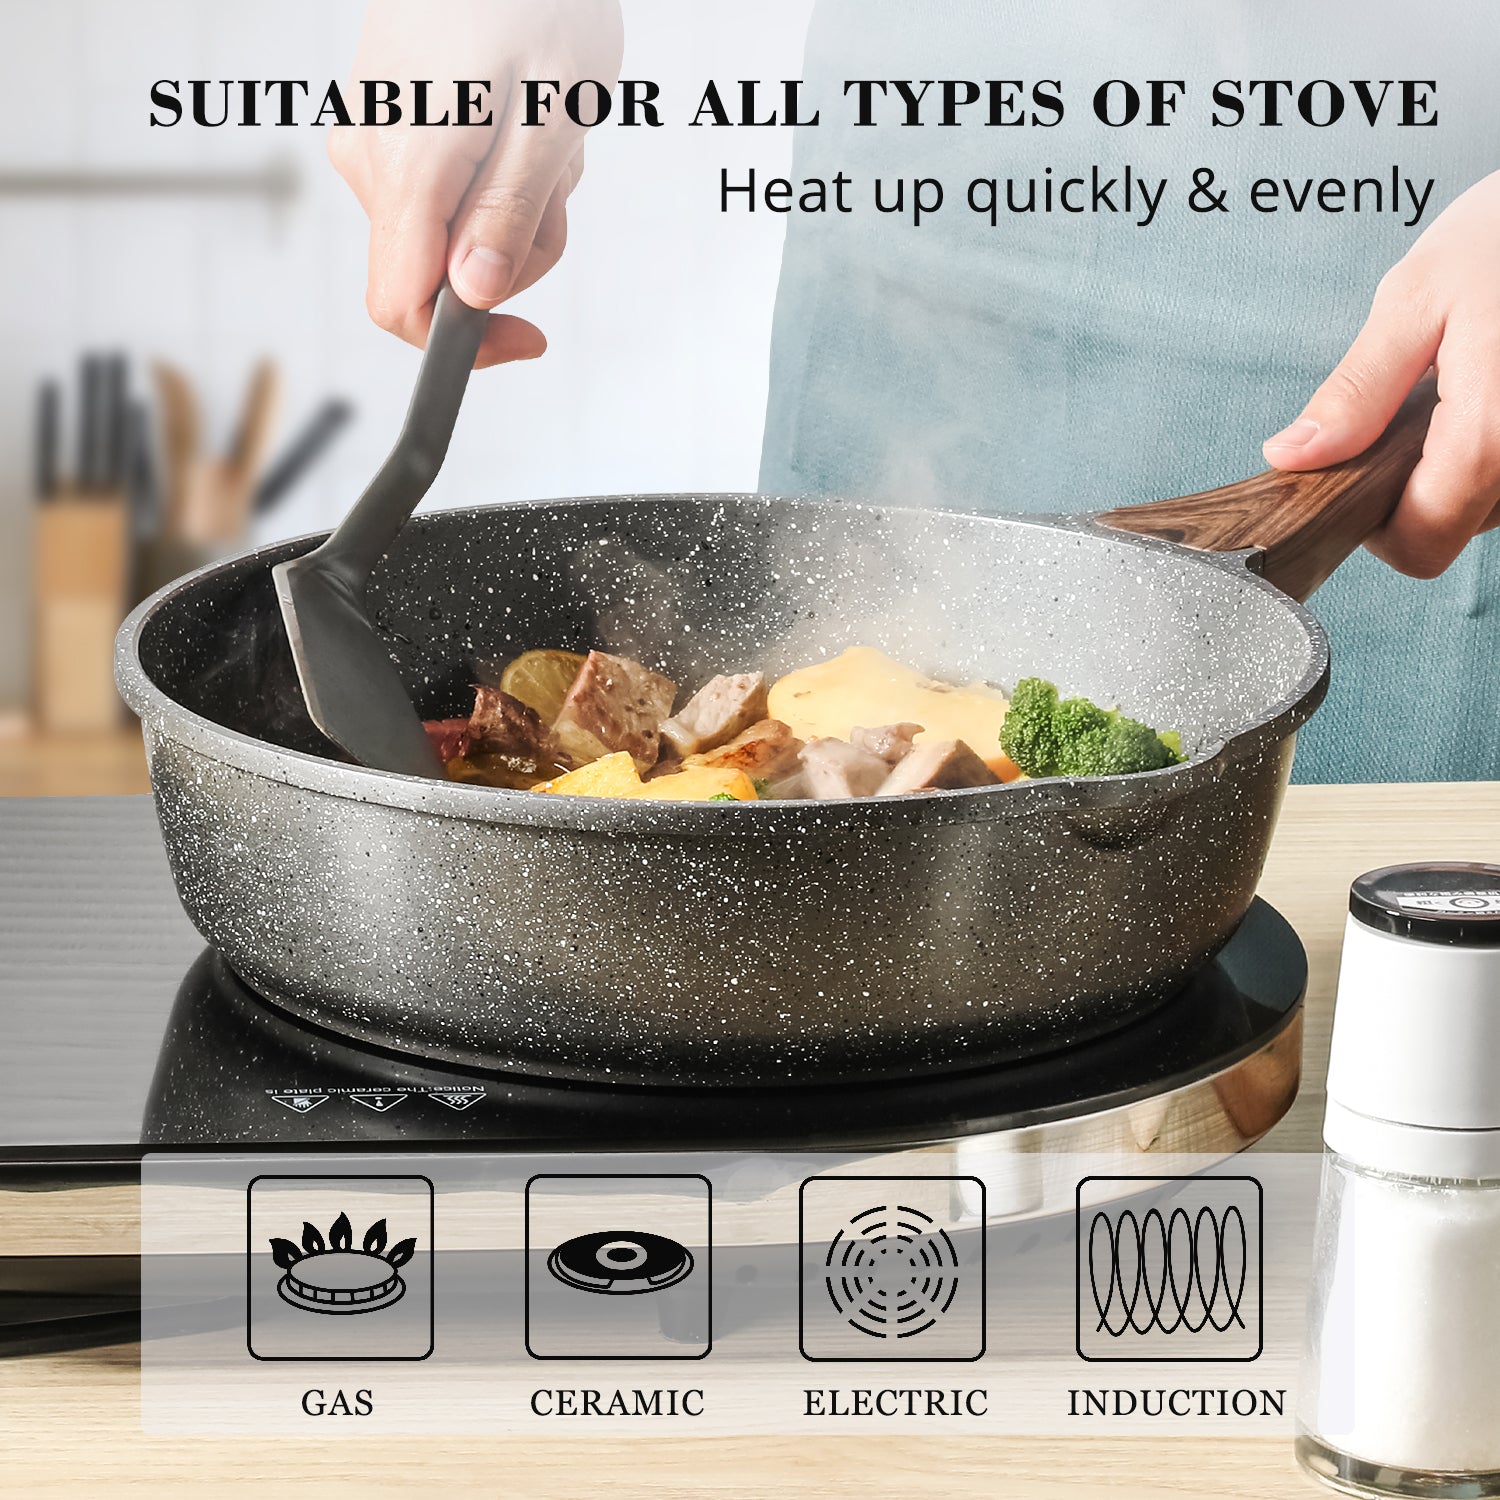 Carote Nonstick Deep Frying Pan with Lid, 12.5 inch Skillet Saute Pan Induction